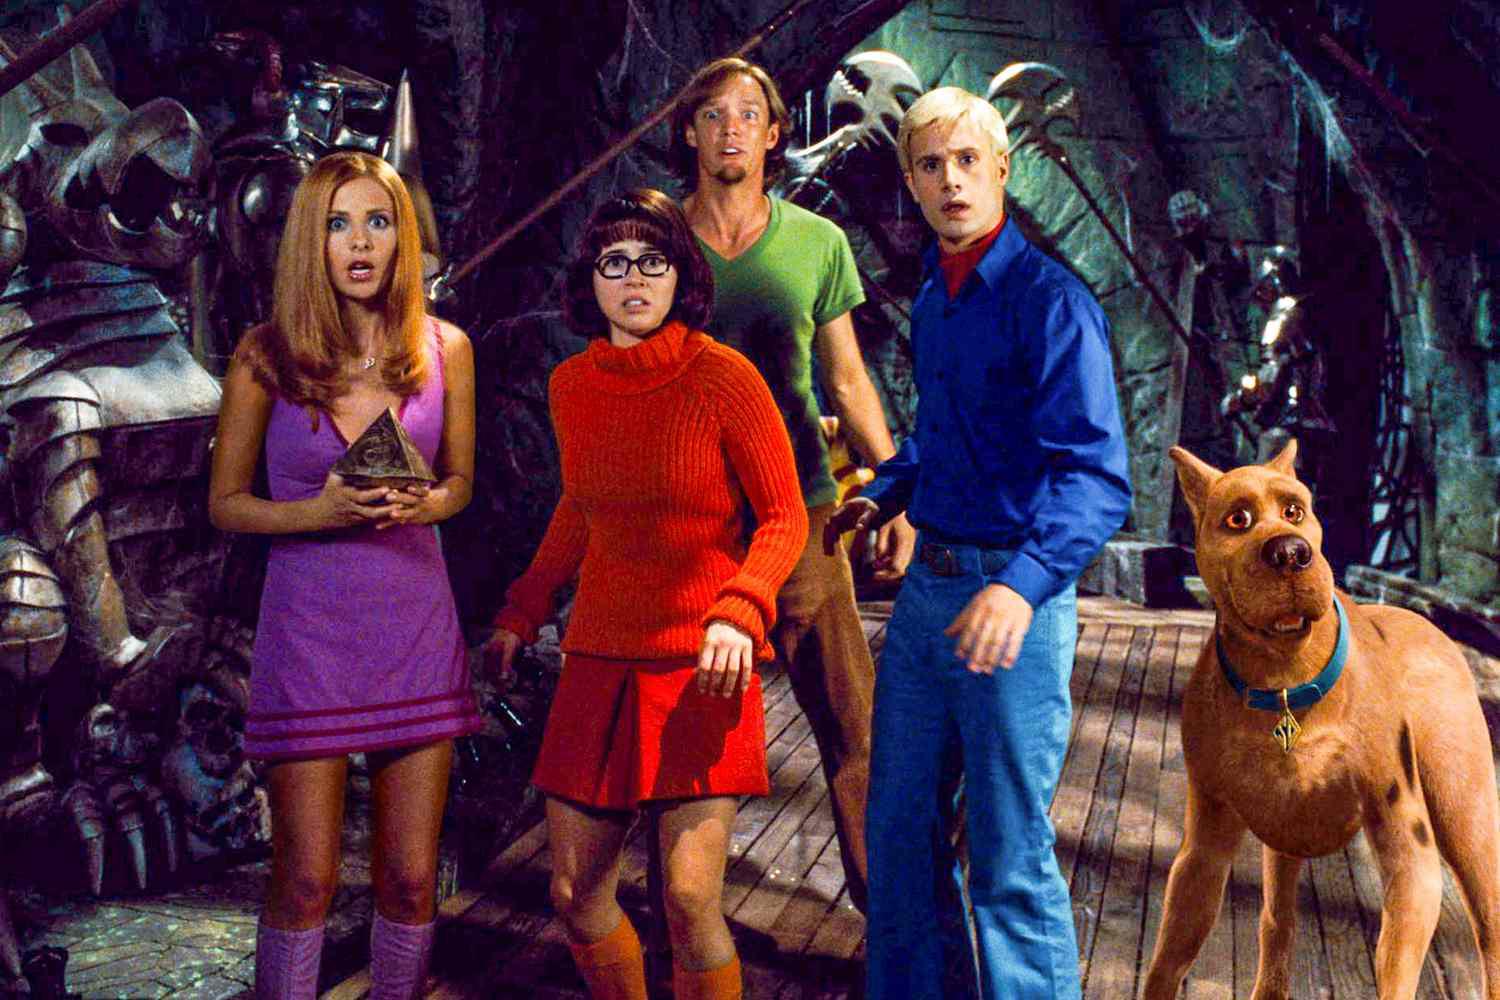 New Live-Action Scooby-Doo Series Secured by Netflix: A Look into ‘Scooby-Doo! The Live-Action Series’